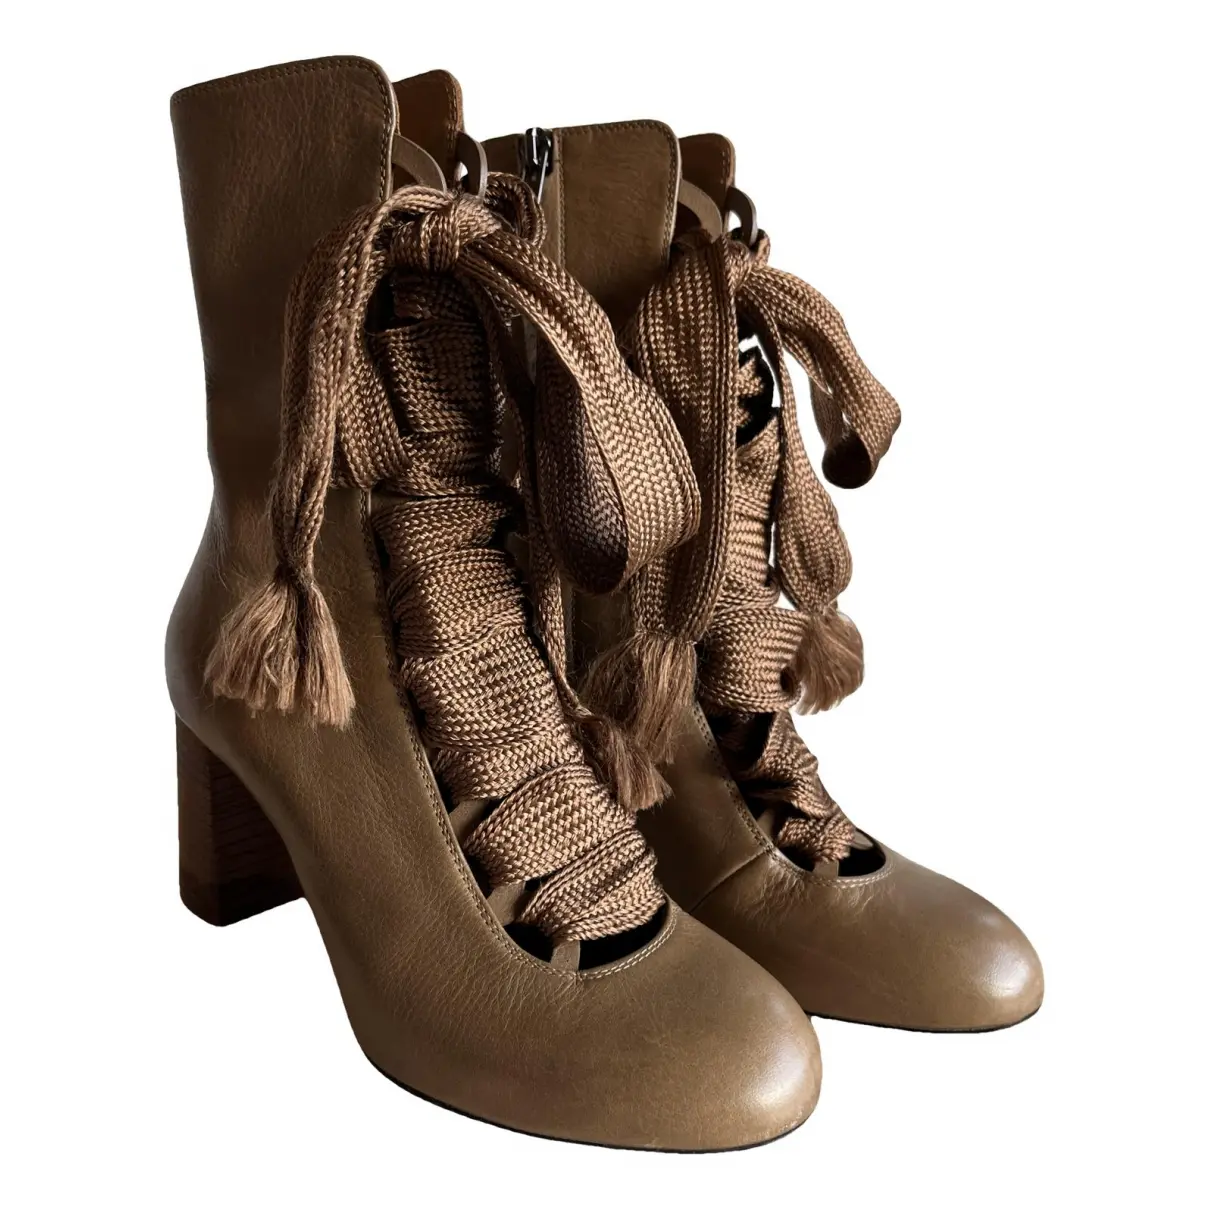 Harper leather boots